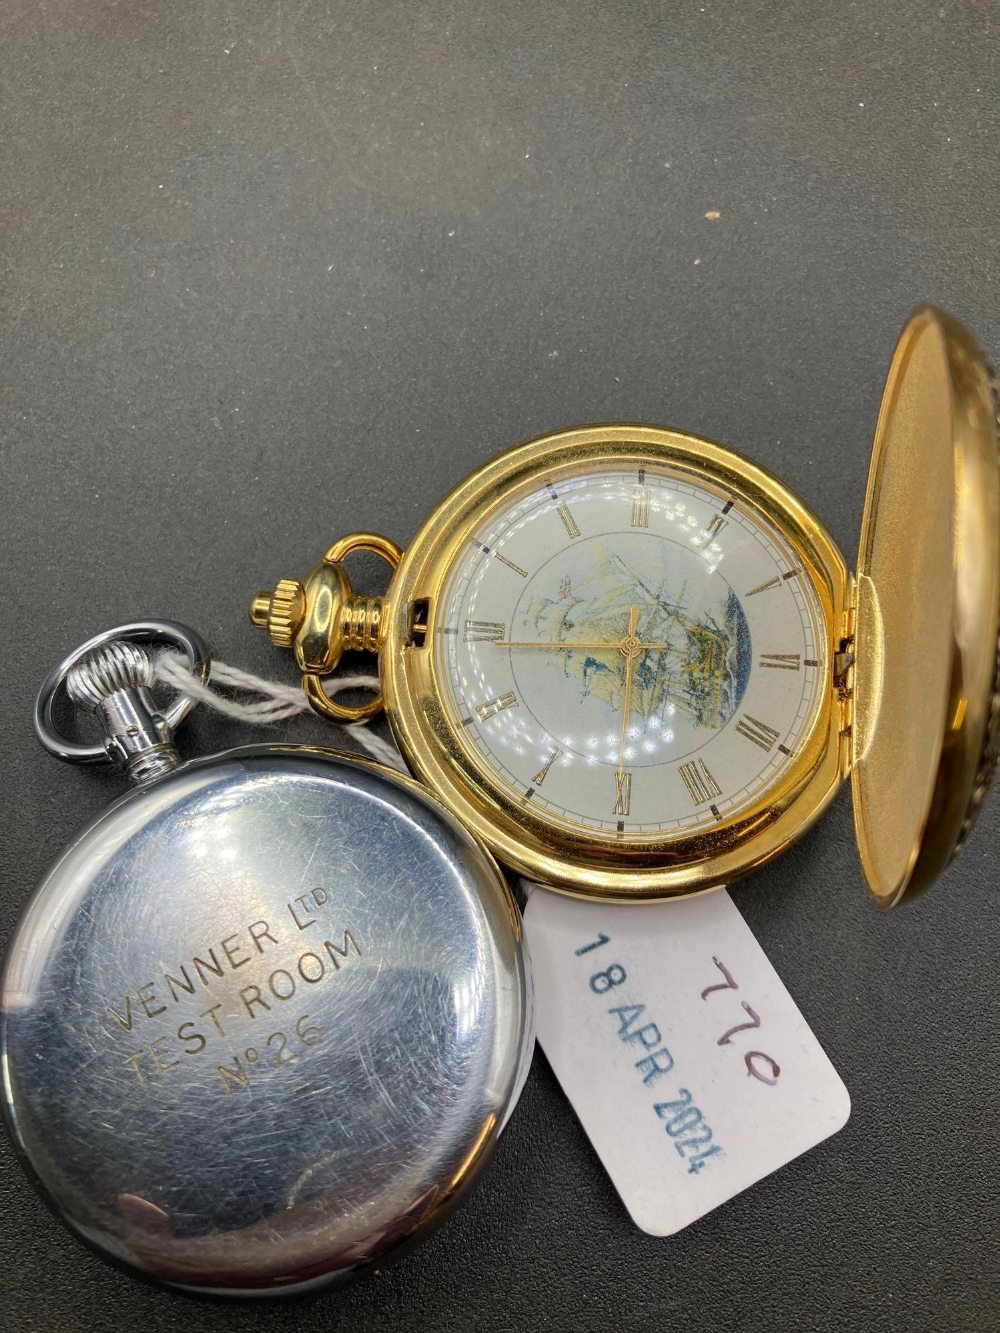 A gents gilt pocket watch and stop watch - Image 2 of 2